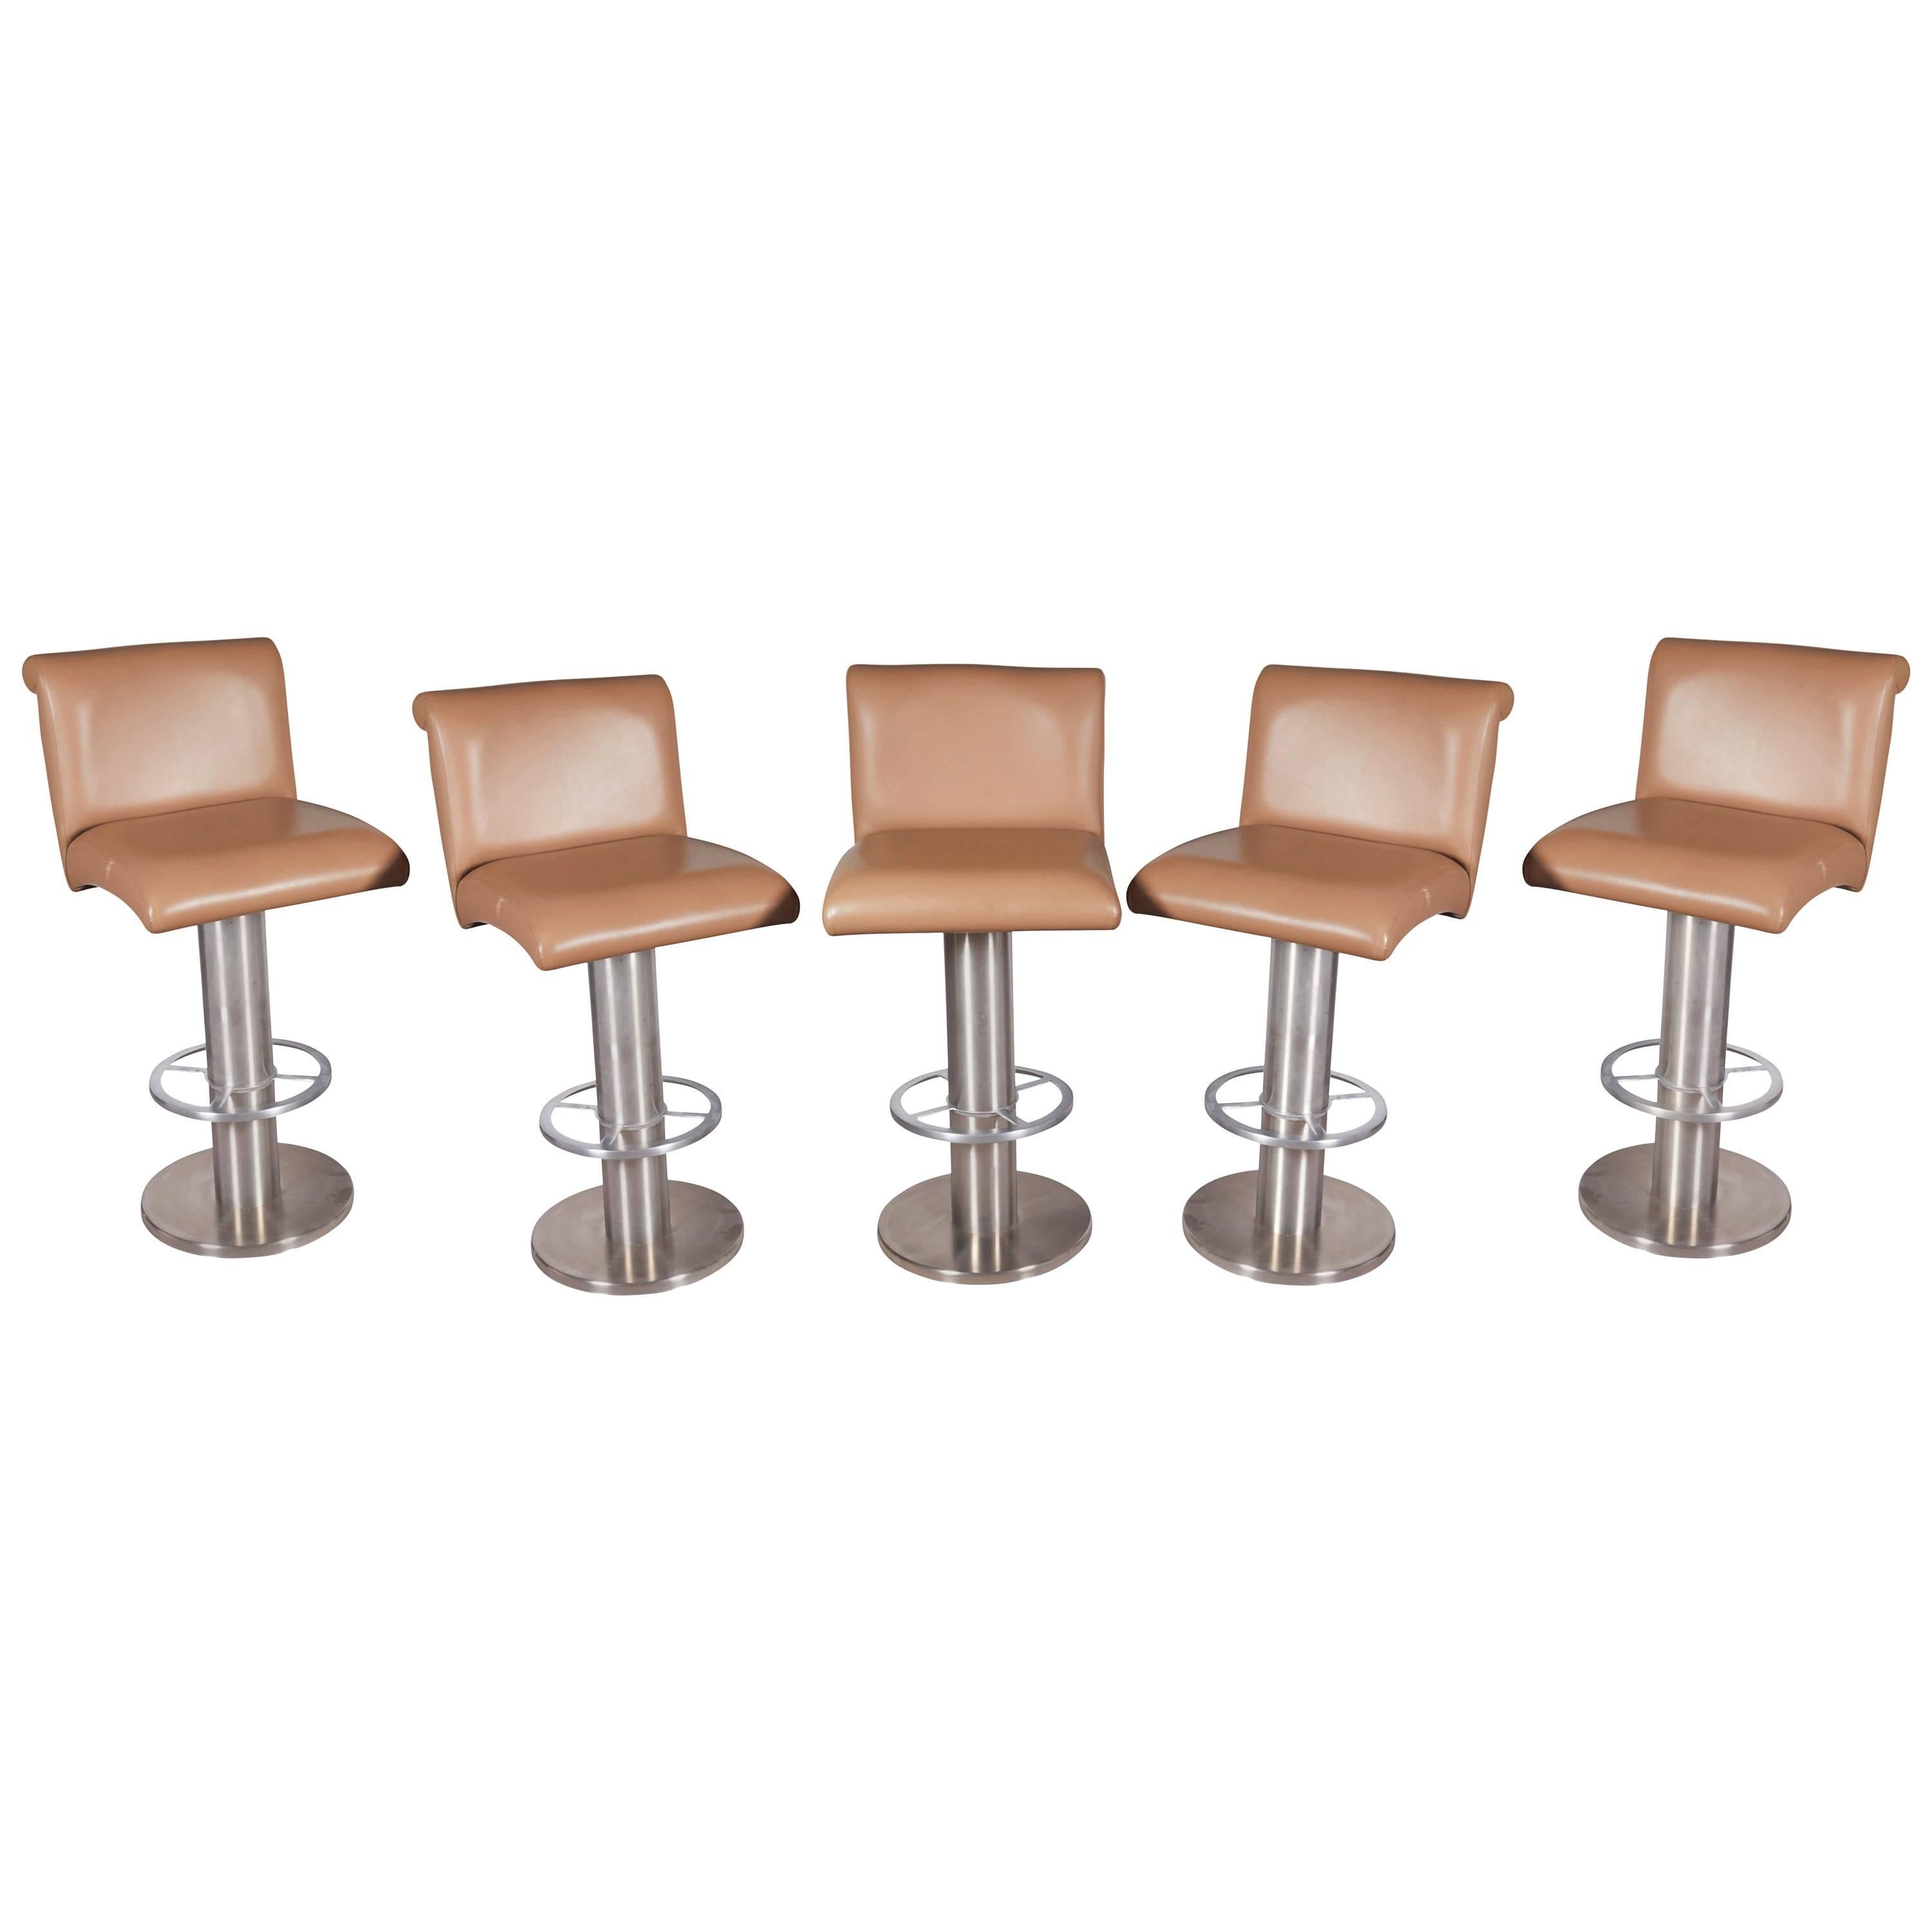 Set of Five Design For Leisure Barstools in Beige Leather on Stainless Steel